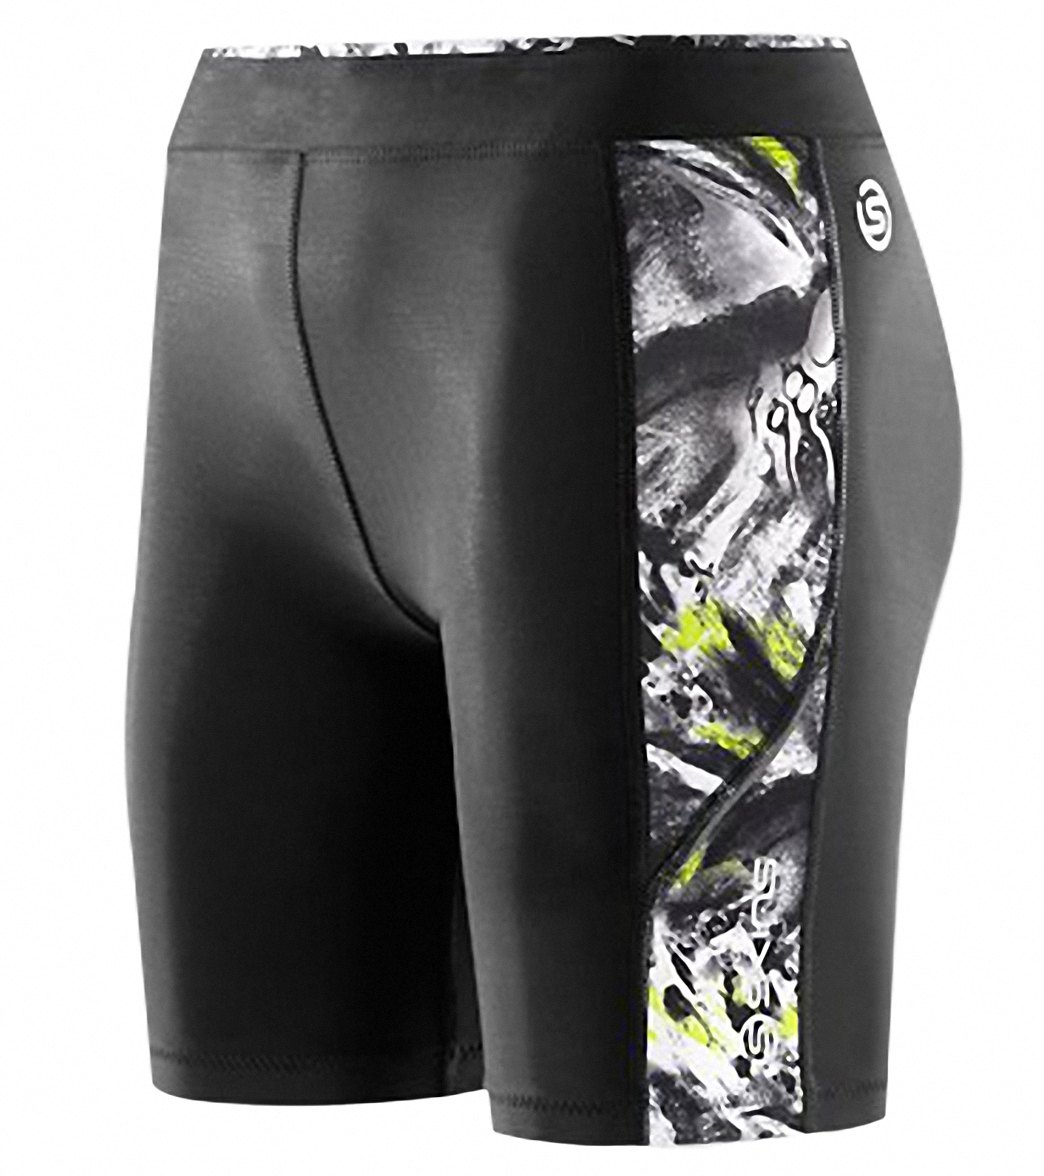 Skins Women's A200 Shorts at SwimOutlet.com - Free Shipping